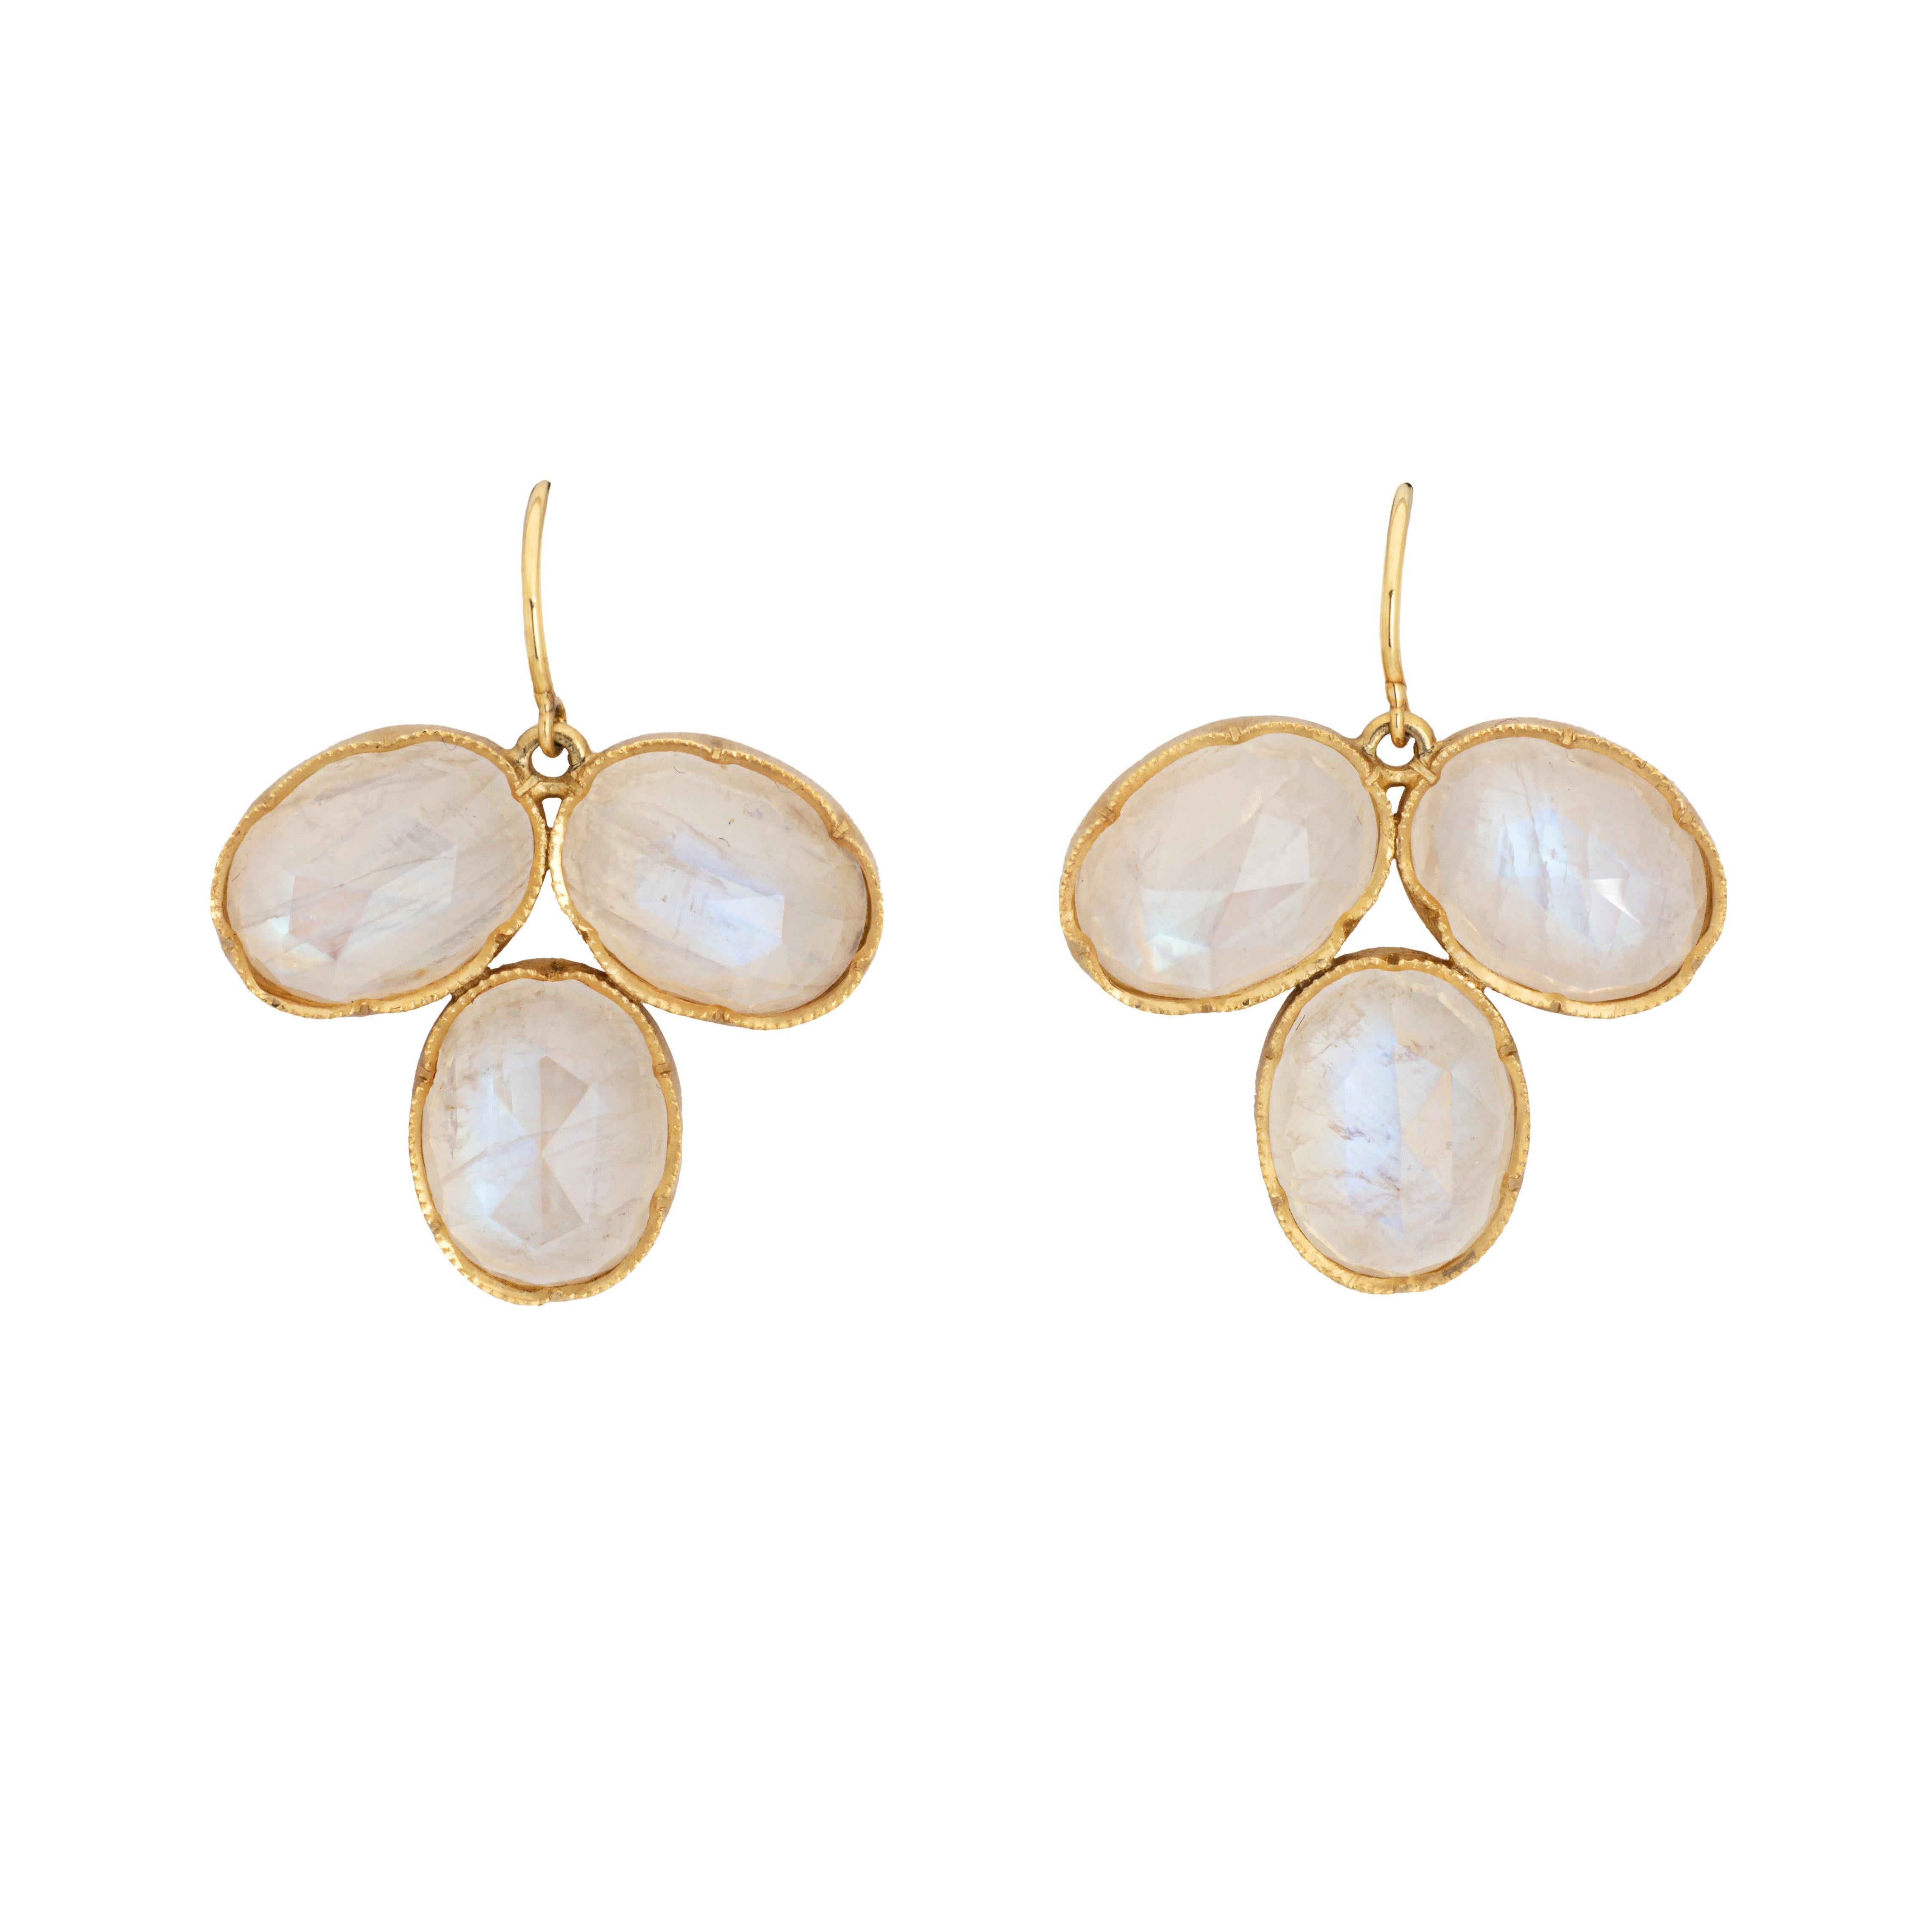 Taille cabochon Irene Neuwirth Moonstone Earrings Estate 18k Gold 1